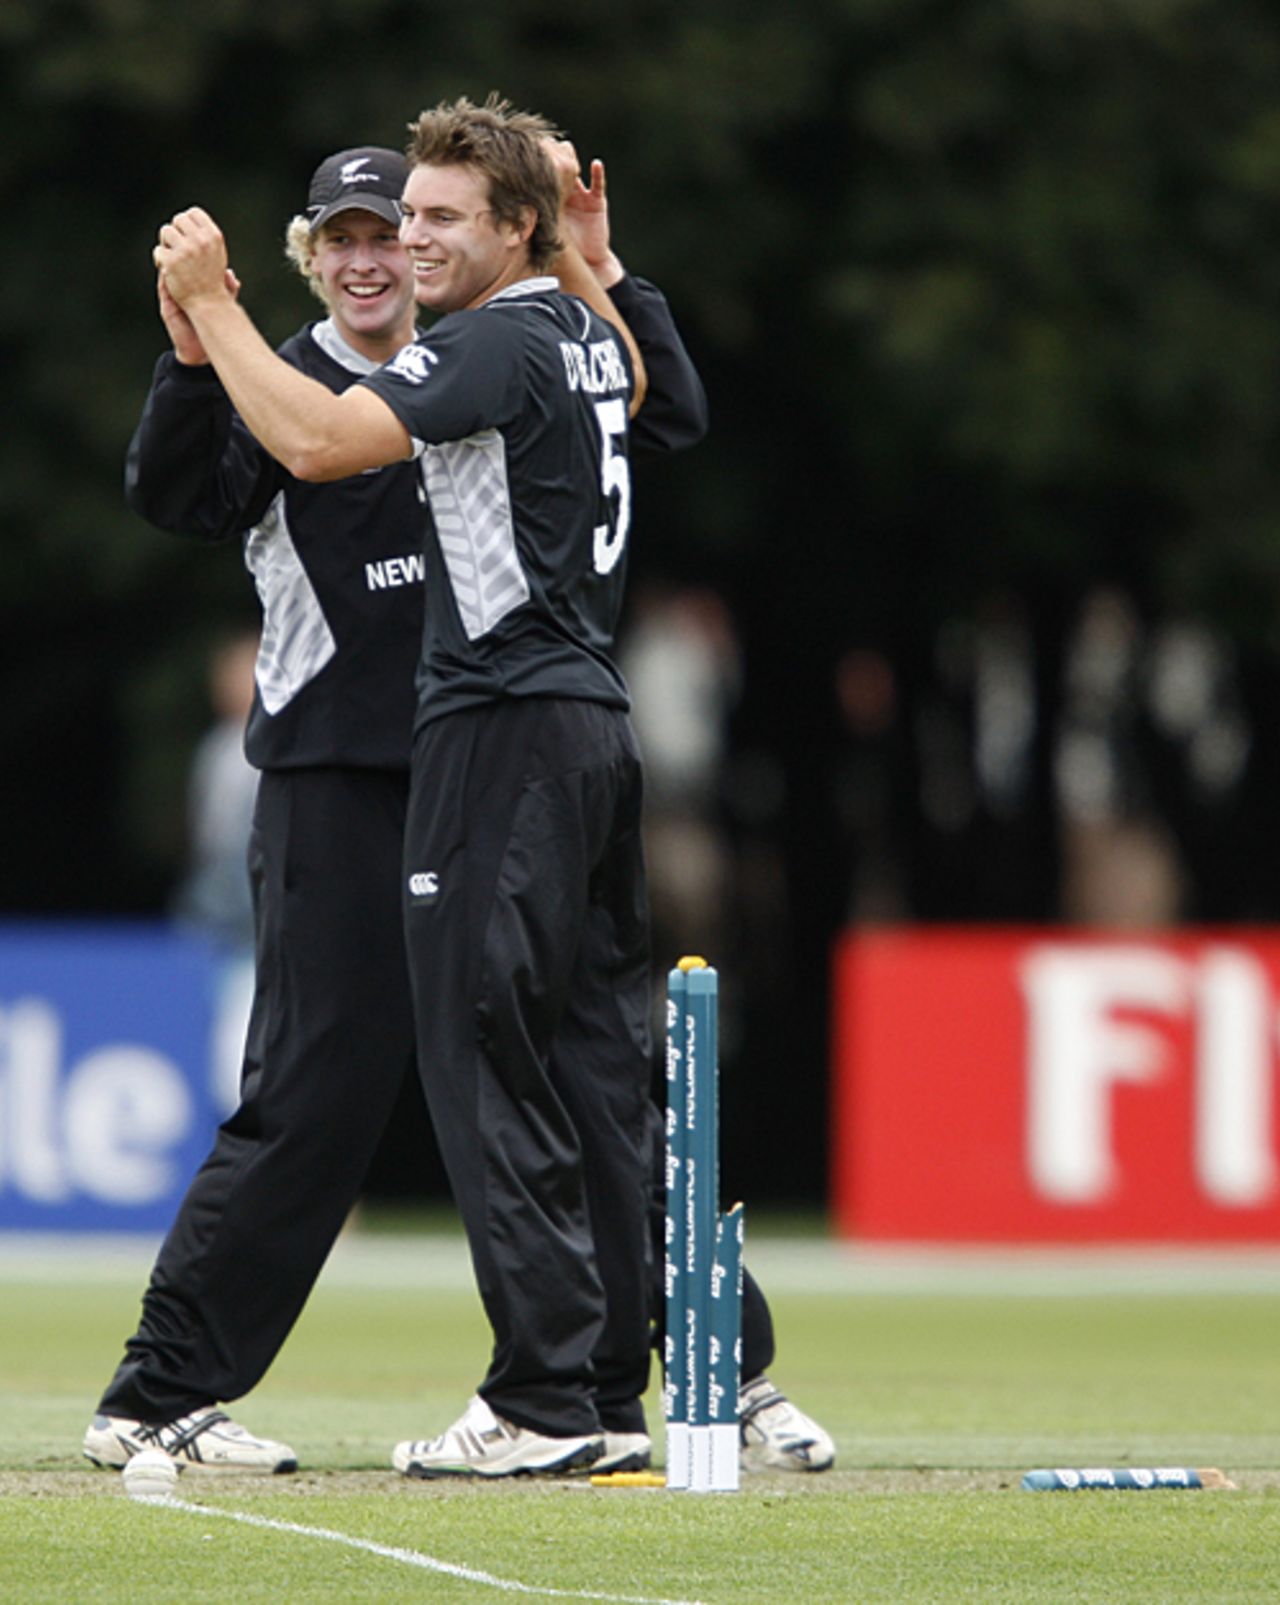 Harry Boam and Doug Bracewell celebrate a wicket, New Zealand Under-19s v Canada Under-19s, 7th Match, Group C, ICC Under-19 World Cup, Lincoln, January 16, 2010